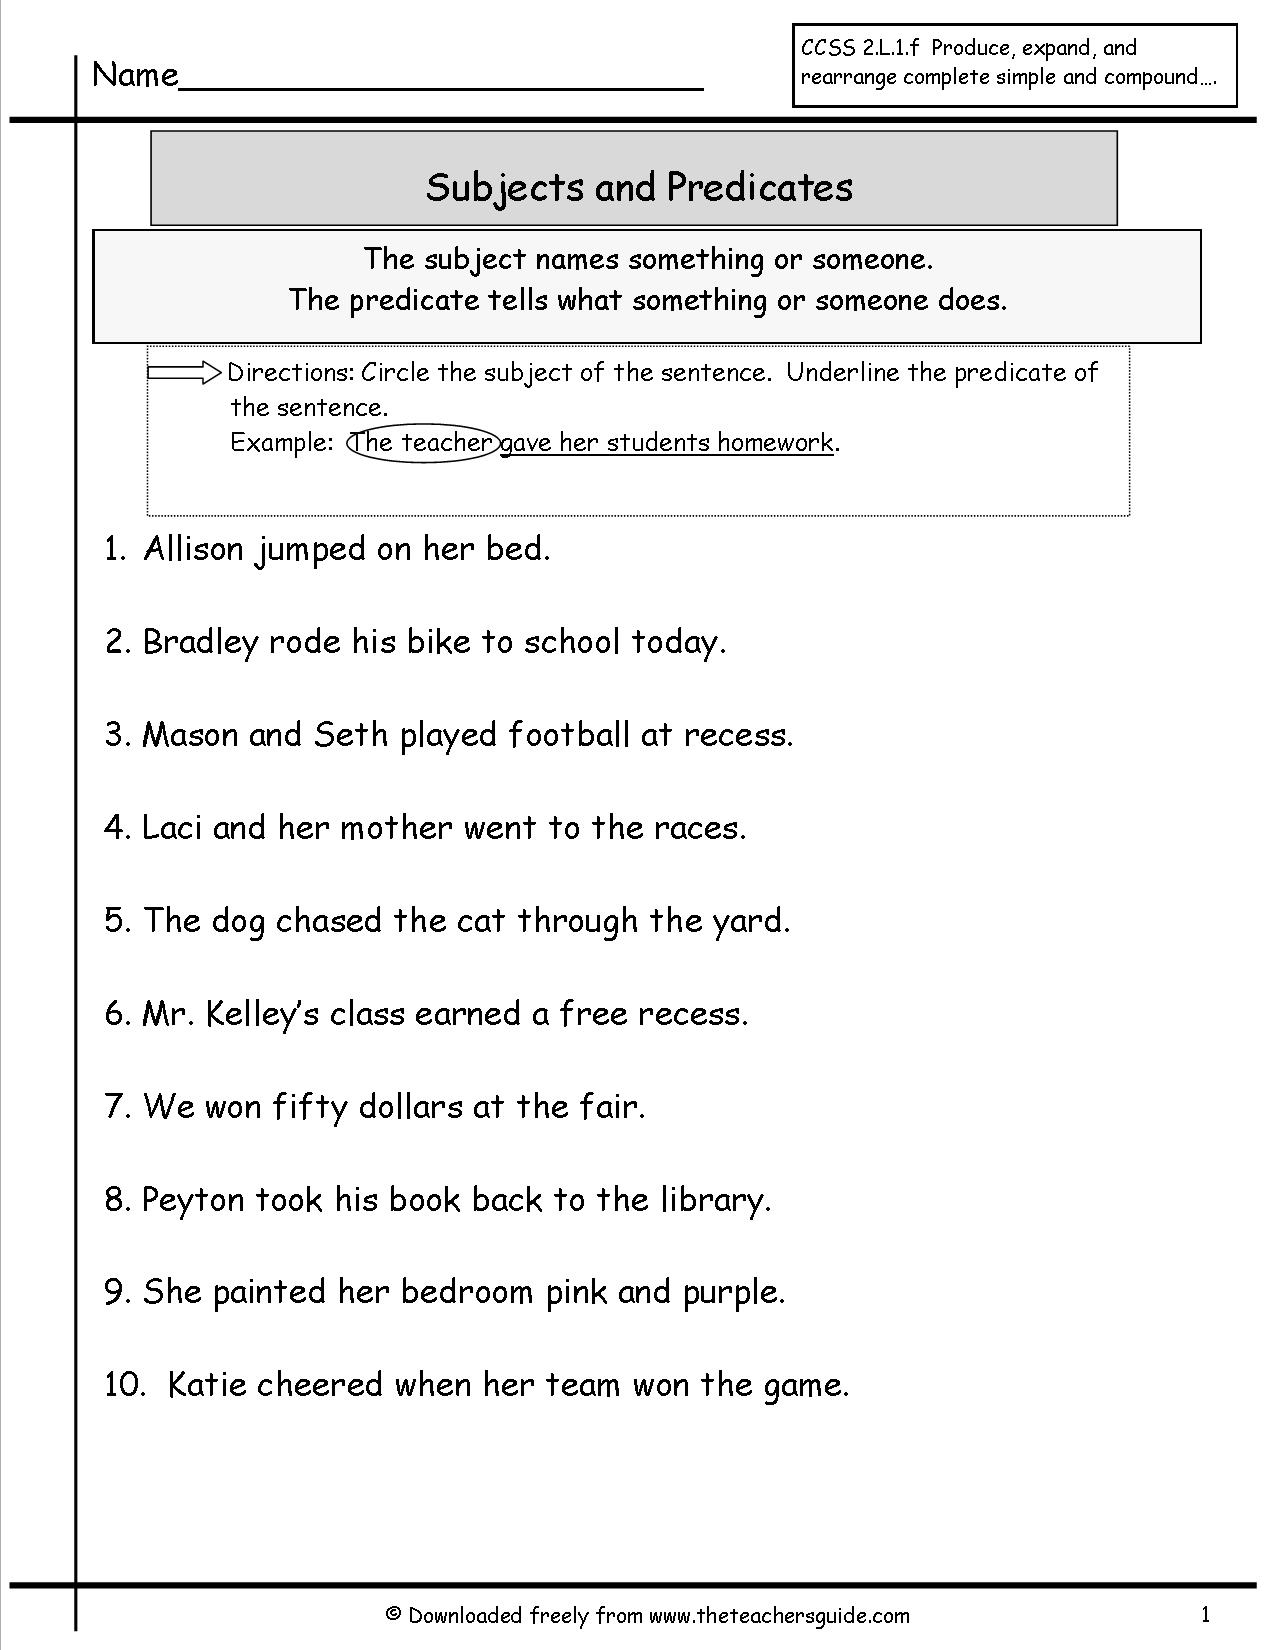 other-worksheet-category-page-330-worksheeto